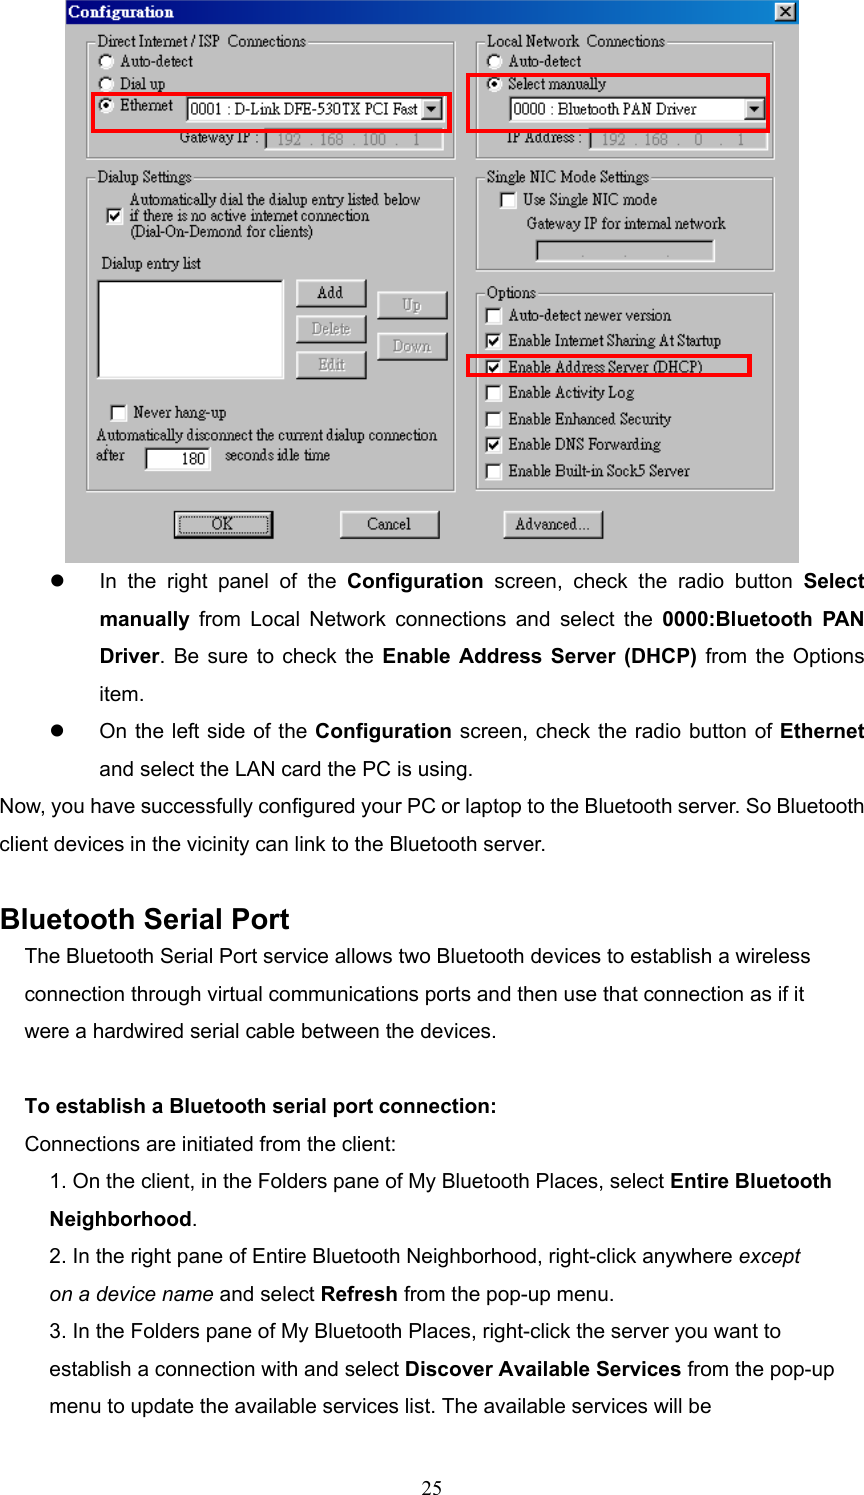  25    In the right panel of the Configuration screen, check the radio button Select manually from Local Network connections and select the 0000:Bluetooth PAN Driver. Be sure to check the Enable Address Server (DHCP) from the Options item.   On the left side of the Configuration screen, check the radio button of Ethernet and select the LAN card the PC is using.   Now, you have successfully configured your PC or laptop to the Bluetooth server. So Bluetooth client devices in the vicinity can link to the Bluetooth server.  Bluetooth Serial Port The Bluetooth Serial Port service allows two Bluetooth devices to establish a wireless connection through virtual communications ports and then use that connection as if it were a hardwired serial cable between the devices.  To establish a Bluetooth serial port connection: Connections are initiated from the client: 1. On the client, in the Folders pane of My Bluetooth Places, select Entire Bluetooth Neighborhood. 2. In the right pane of Entire Bluetooth Neighborhood, right-click anywhere except on a device name and select Refresh from the pop-up menu. 3. In the Folders pane of My Bluetooth Places, right-click the server you want to establish a connection with and select Discover Available Services from the pop-up menu to update the available services list. The available services will be 